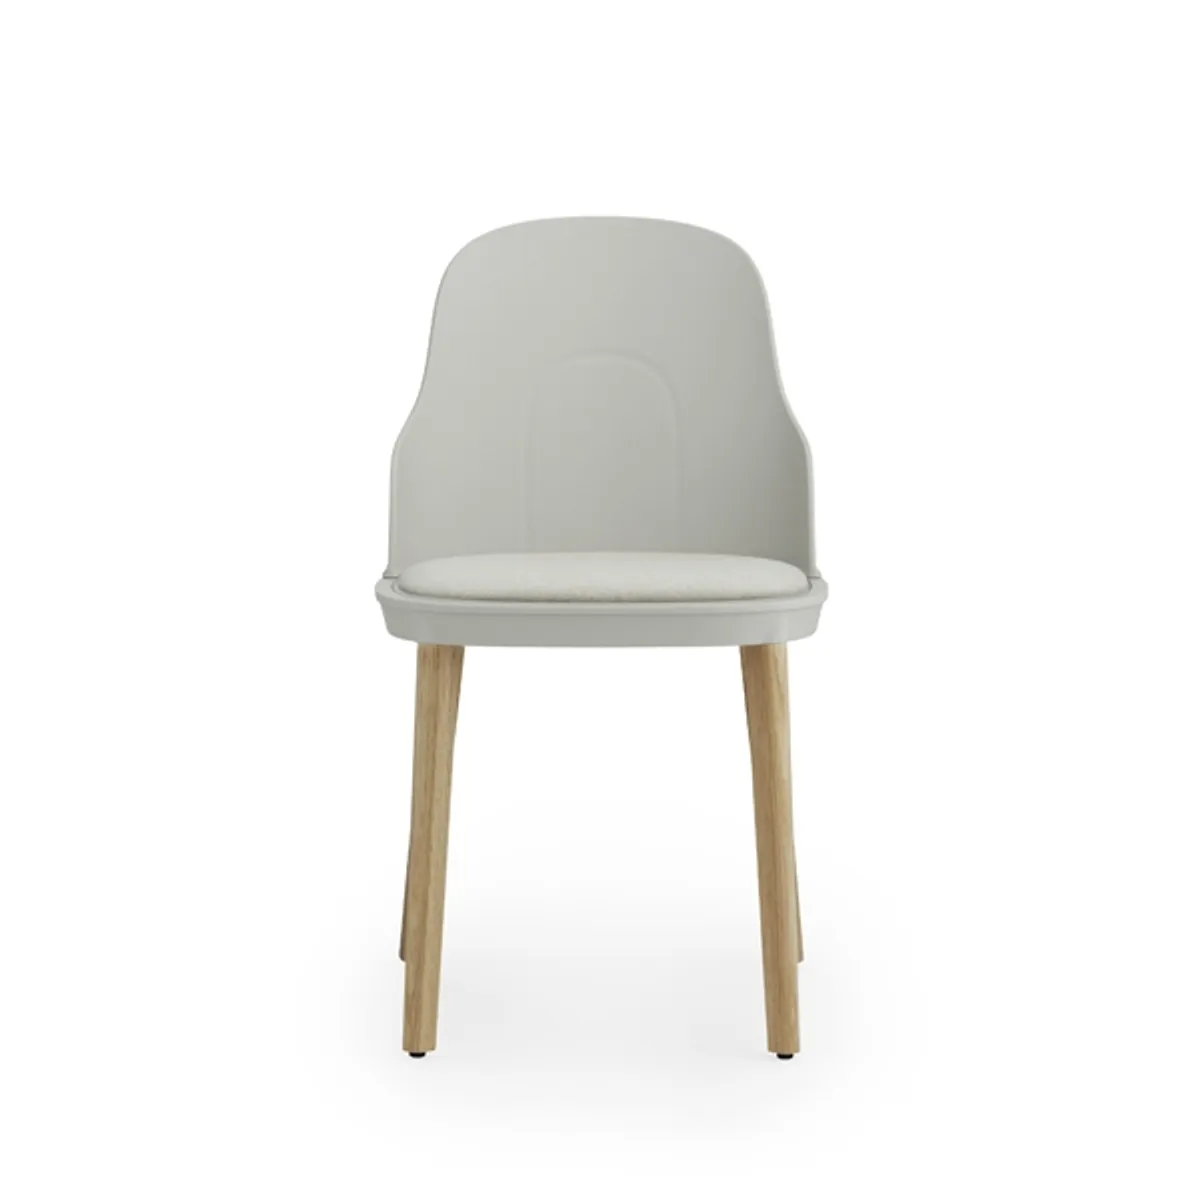 Bon soft wood chair Inside Out Contracts6